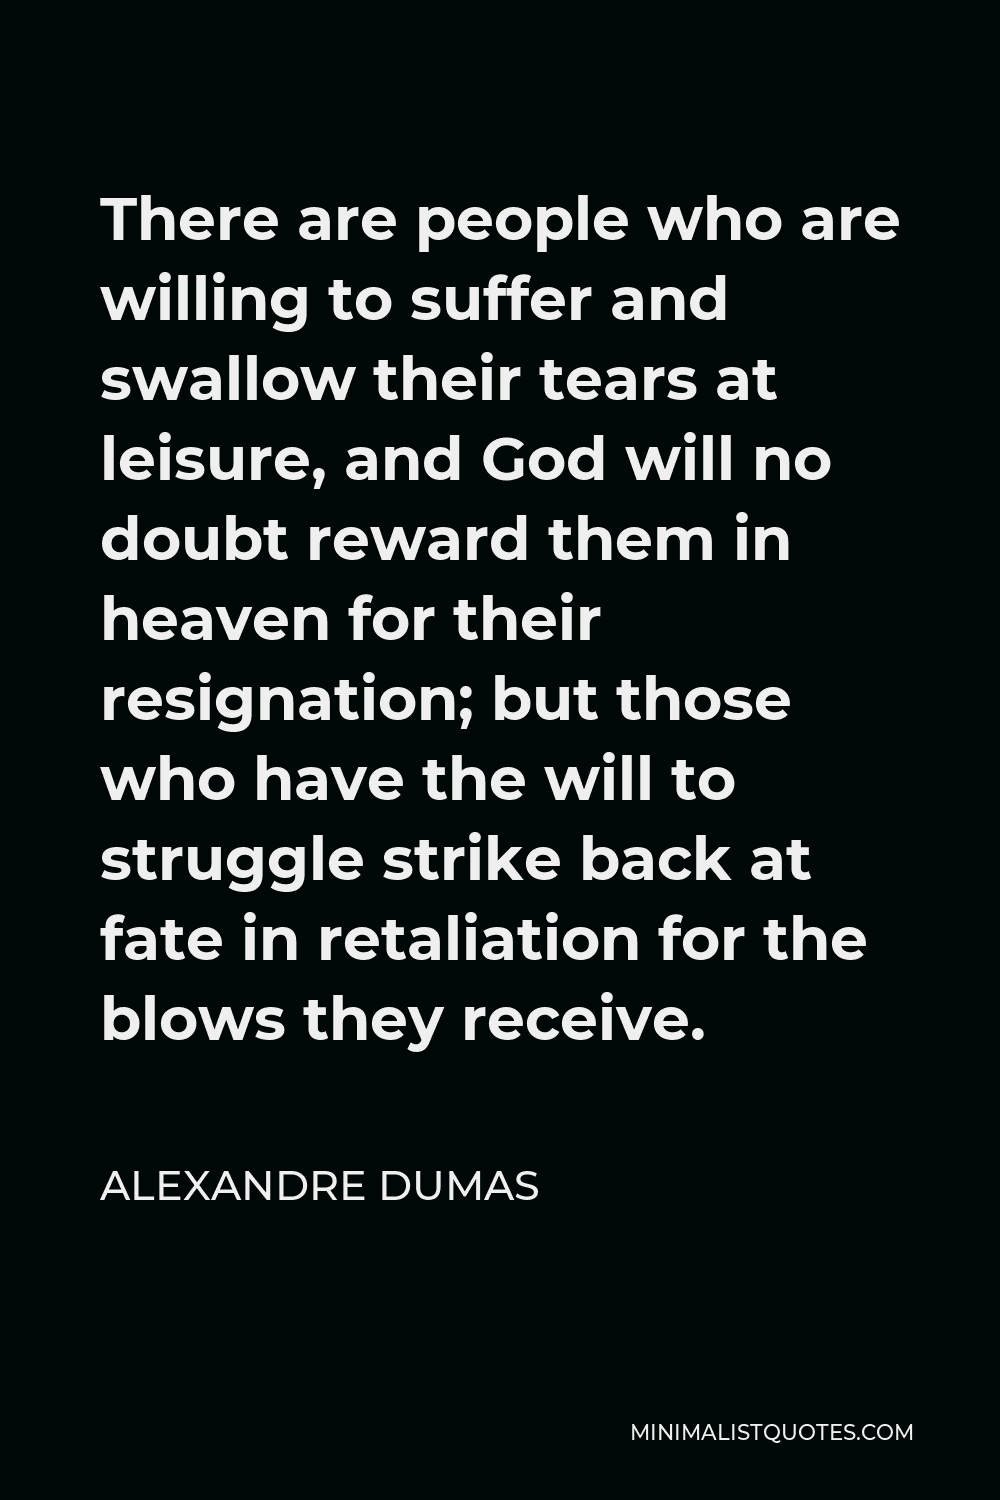 Alexandre Dumas Quote - There are people who are willing to suffer and swallow their tears at leisure, and God will no doubt reward them in heaven for their resignation; but those who have the will to struggle strike back at fate in retaliation for the blows they receive.